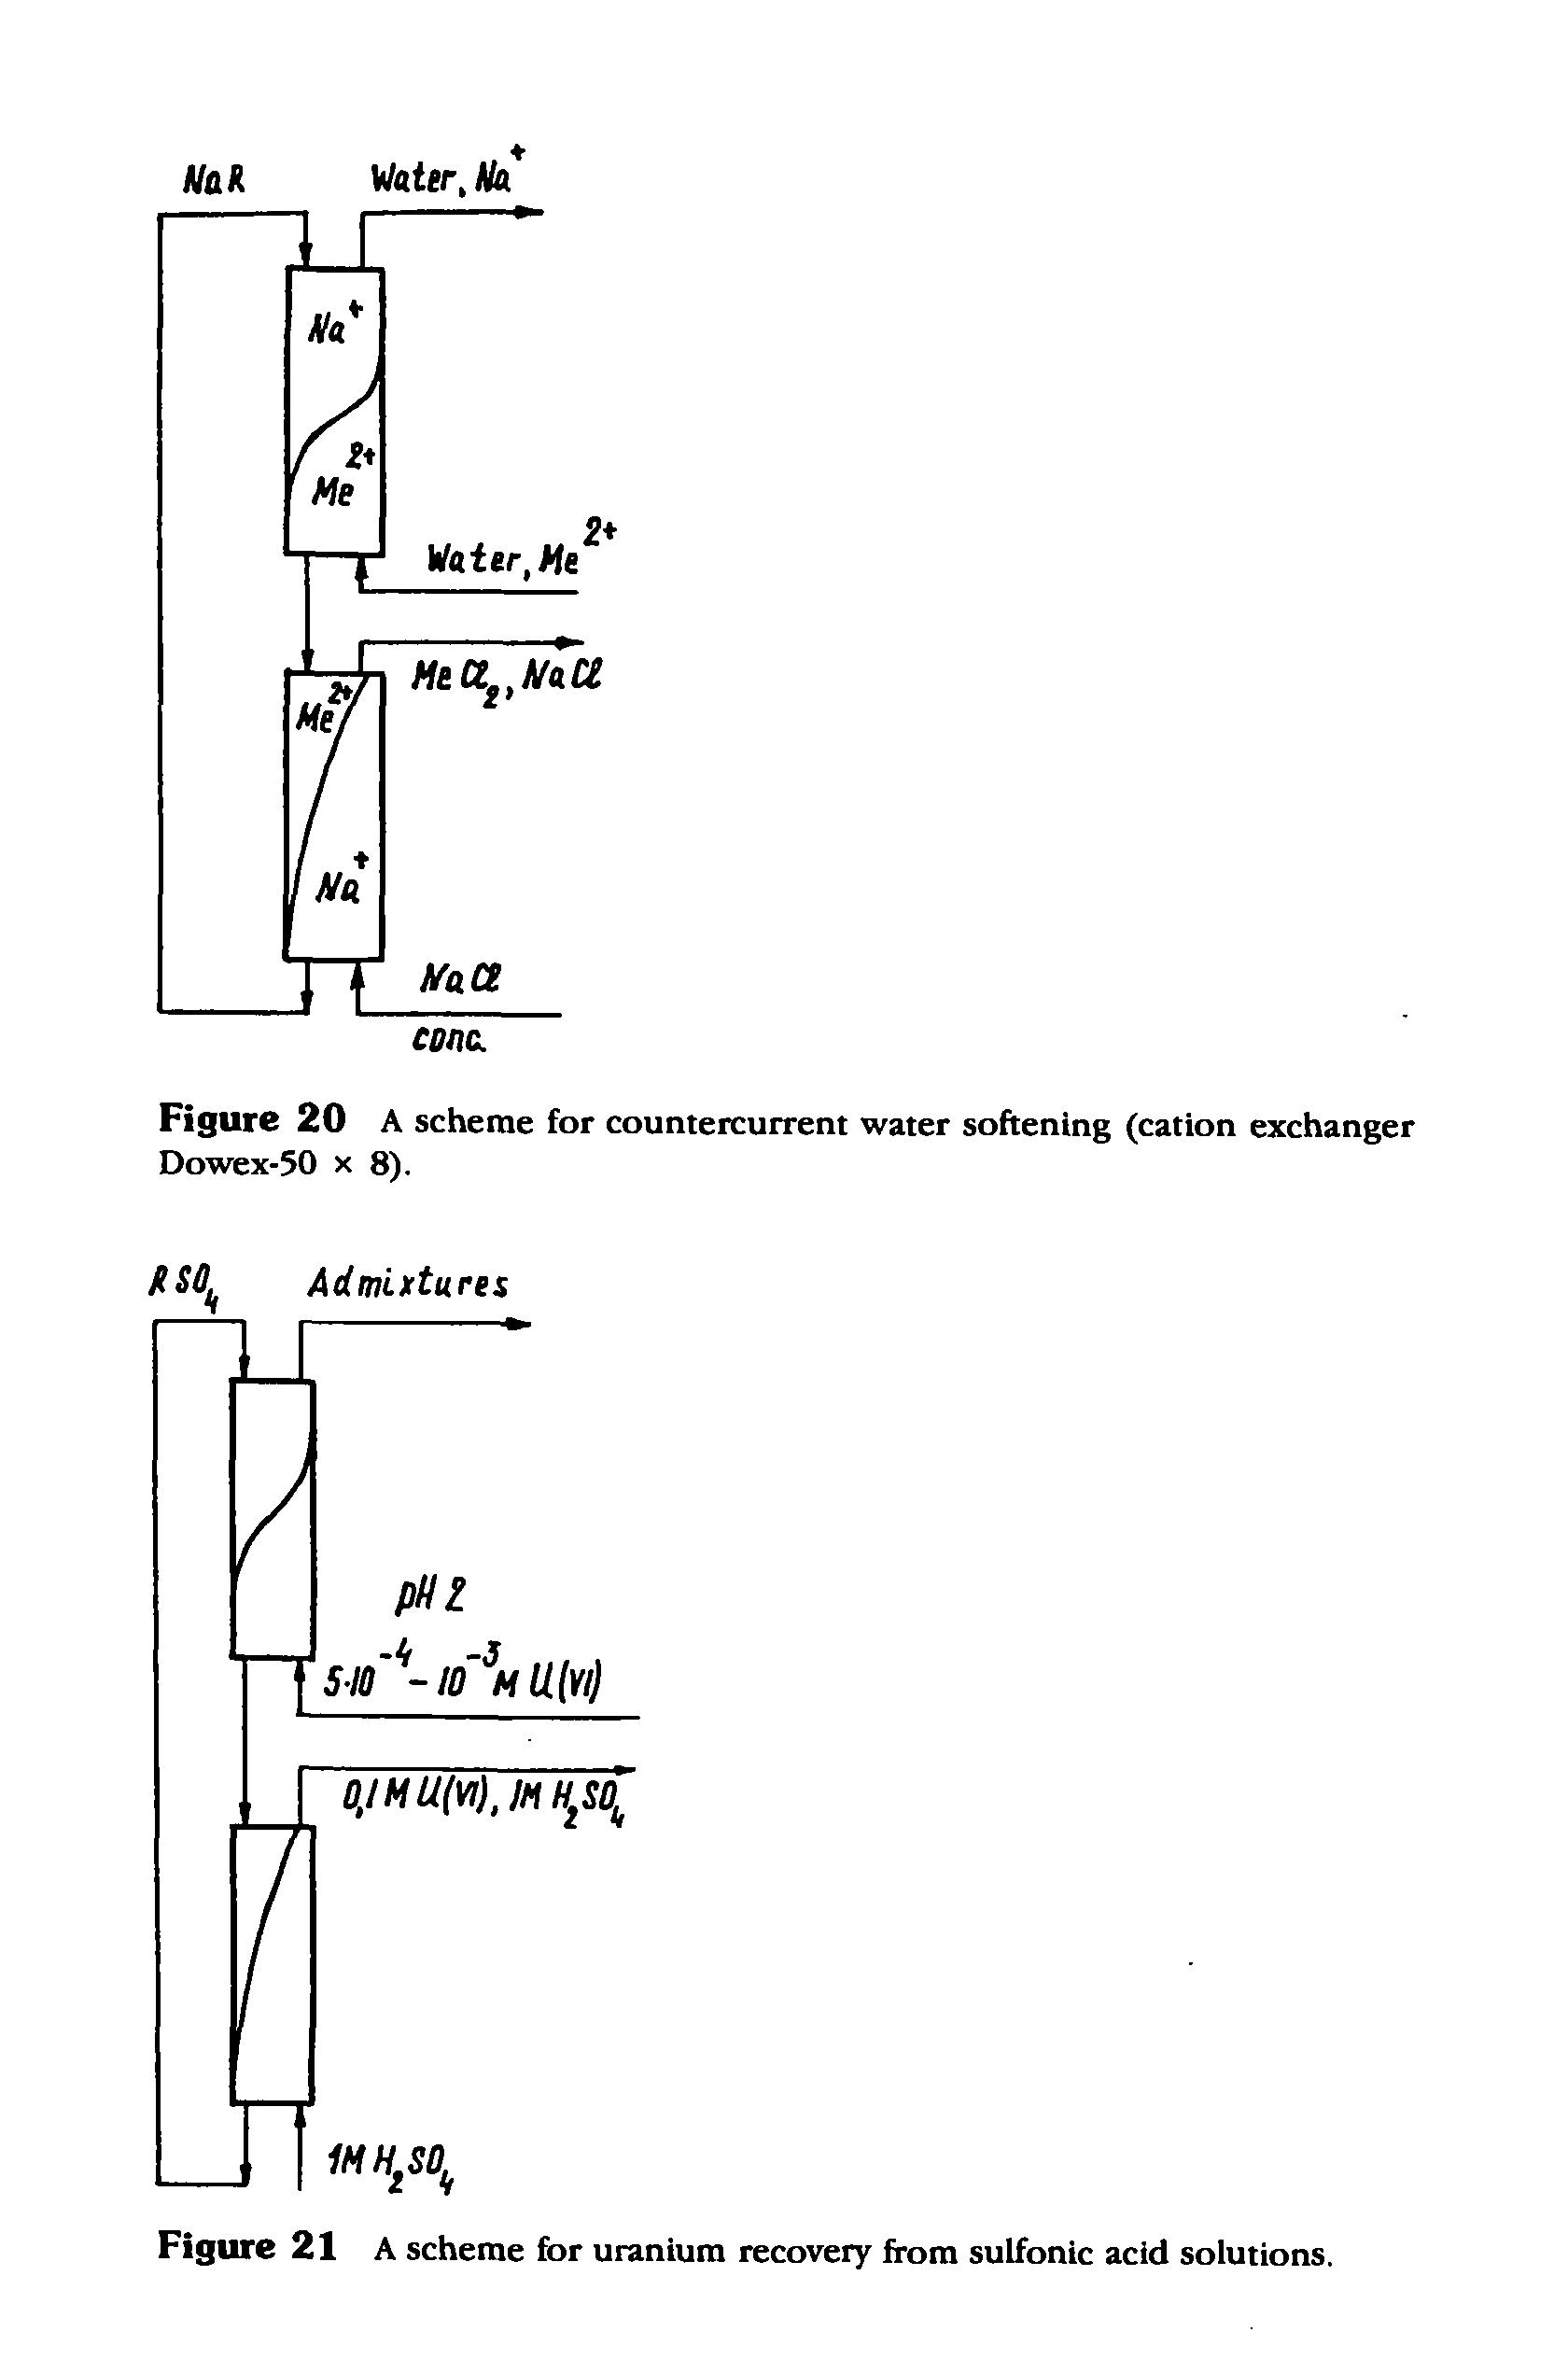 Figure 20 A scheme for countercurrent water softening (cation exchanger Dowex-50 X 8).